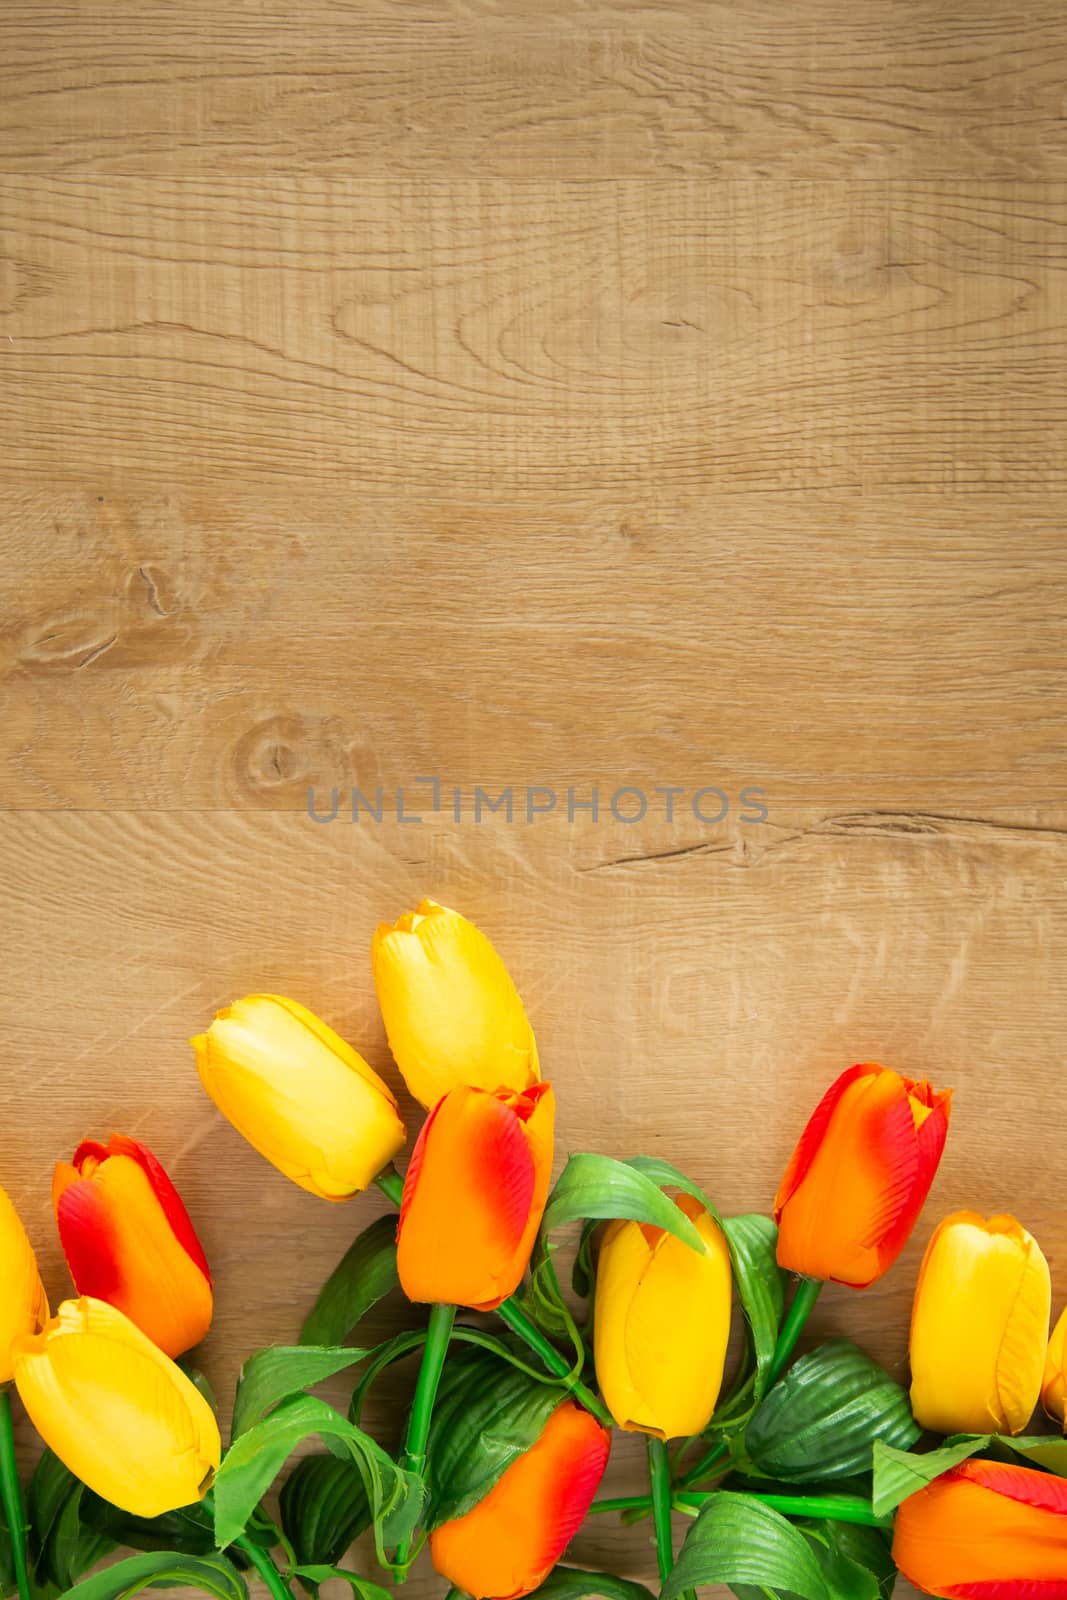 Tulips bunch on wooden background by tehcheesiong